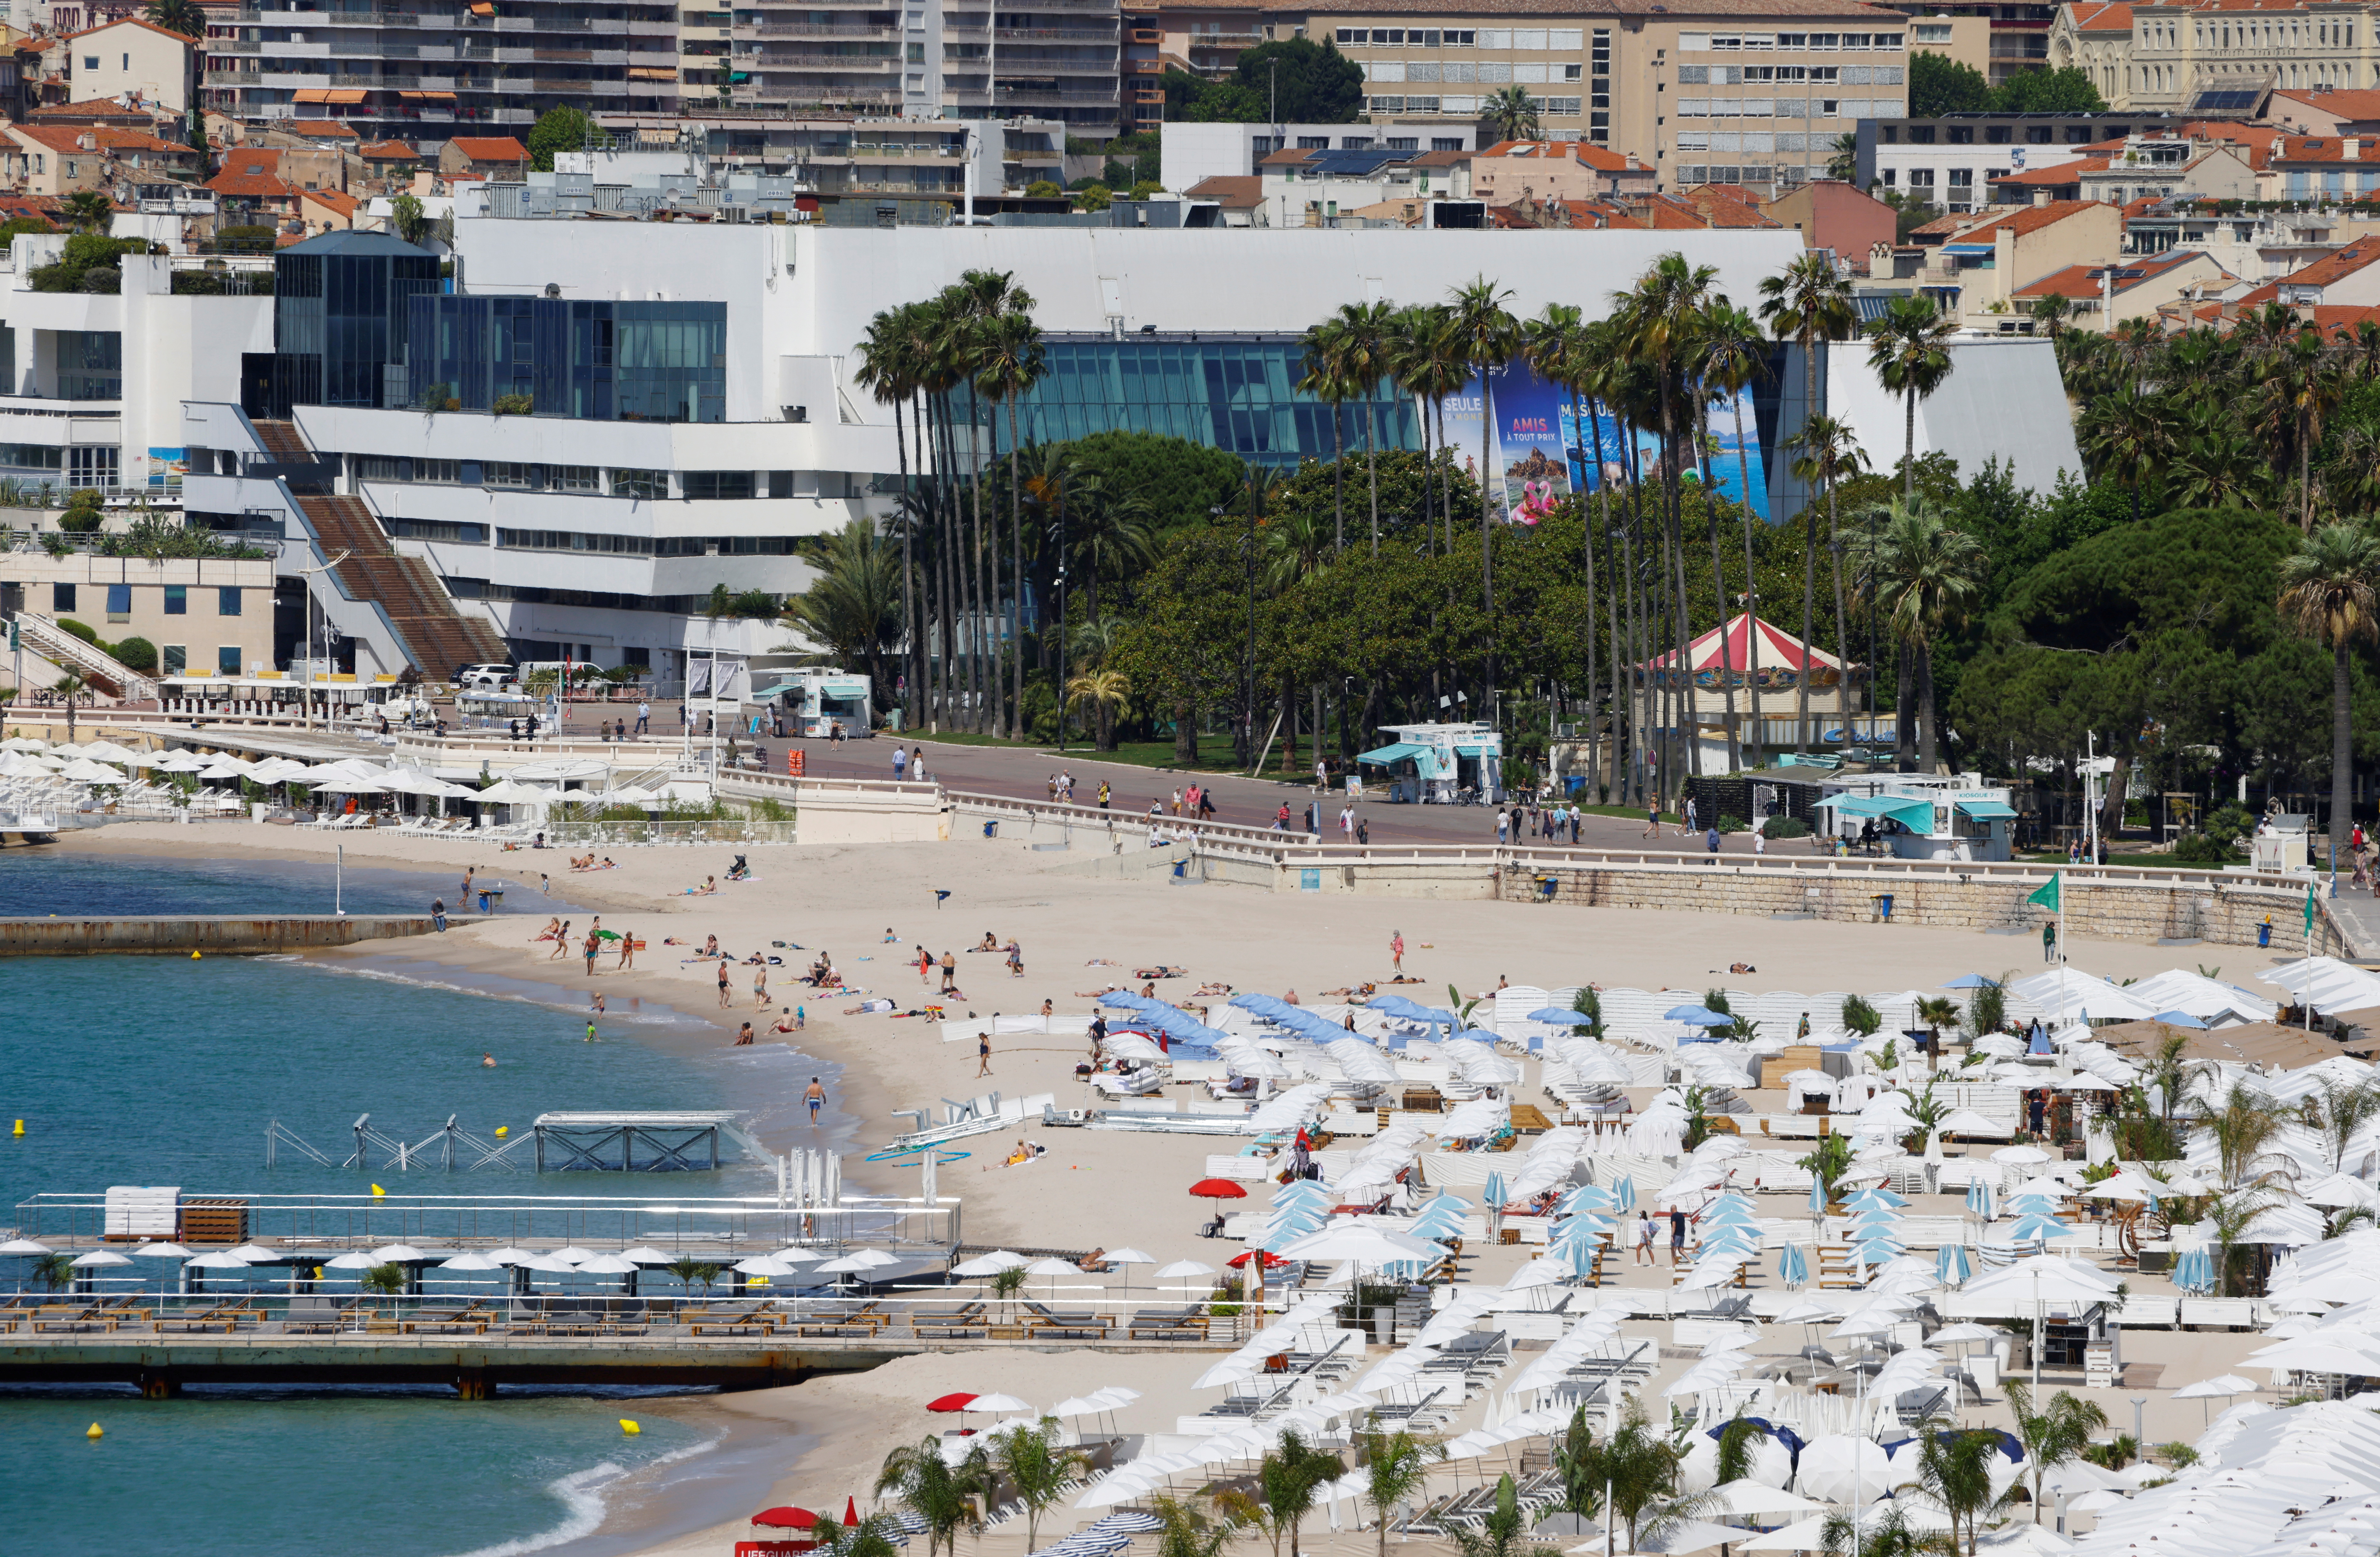 Cannes prepares for the 74th Cannes International Film Festival in Cannes